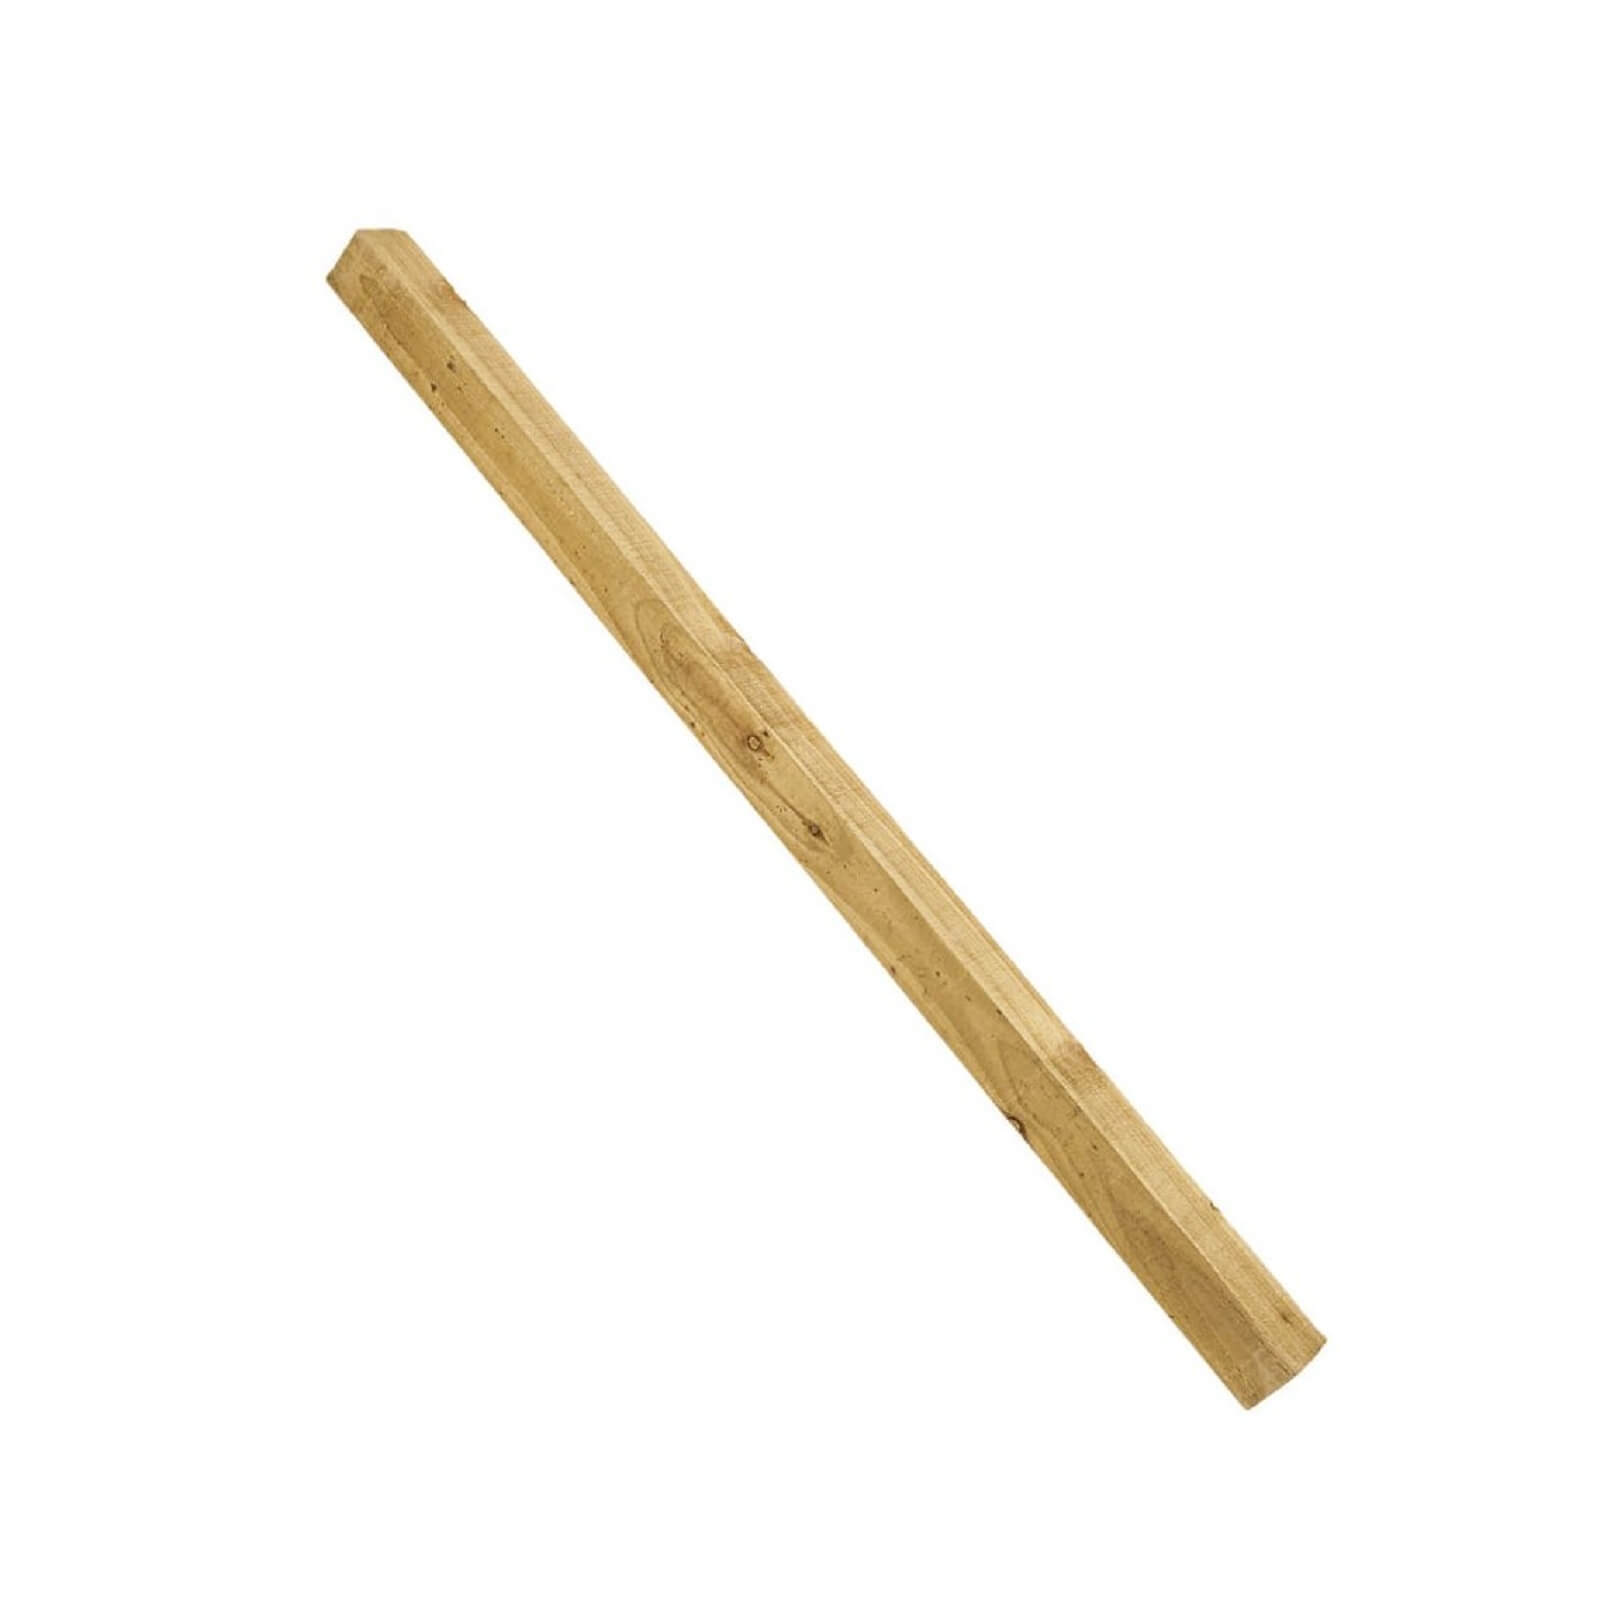 Photo of Larchlap Sawn Post - 7ft X 3in X 3in - 4 Pack